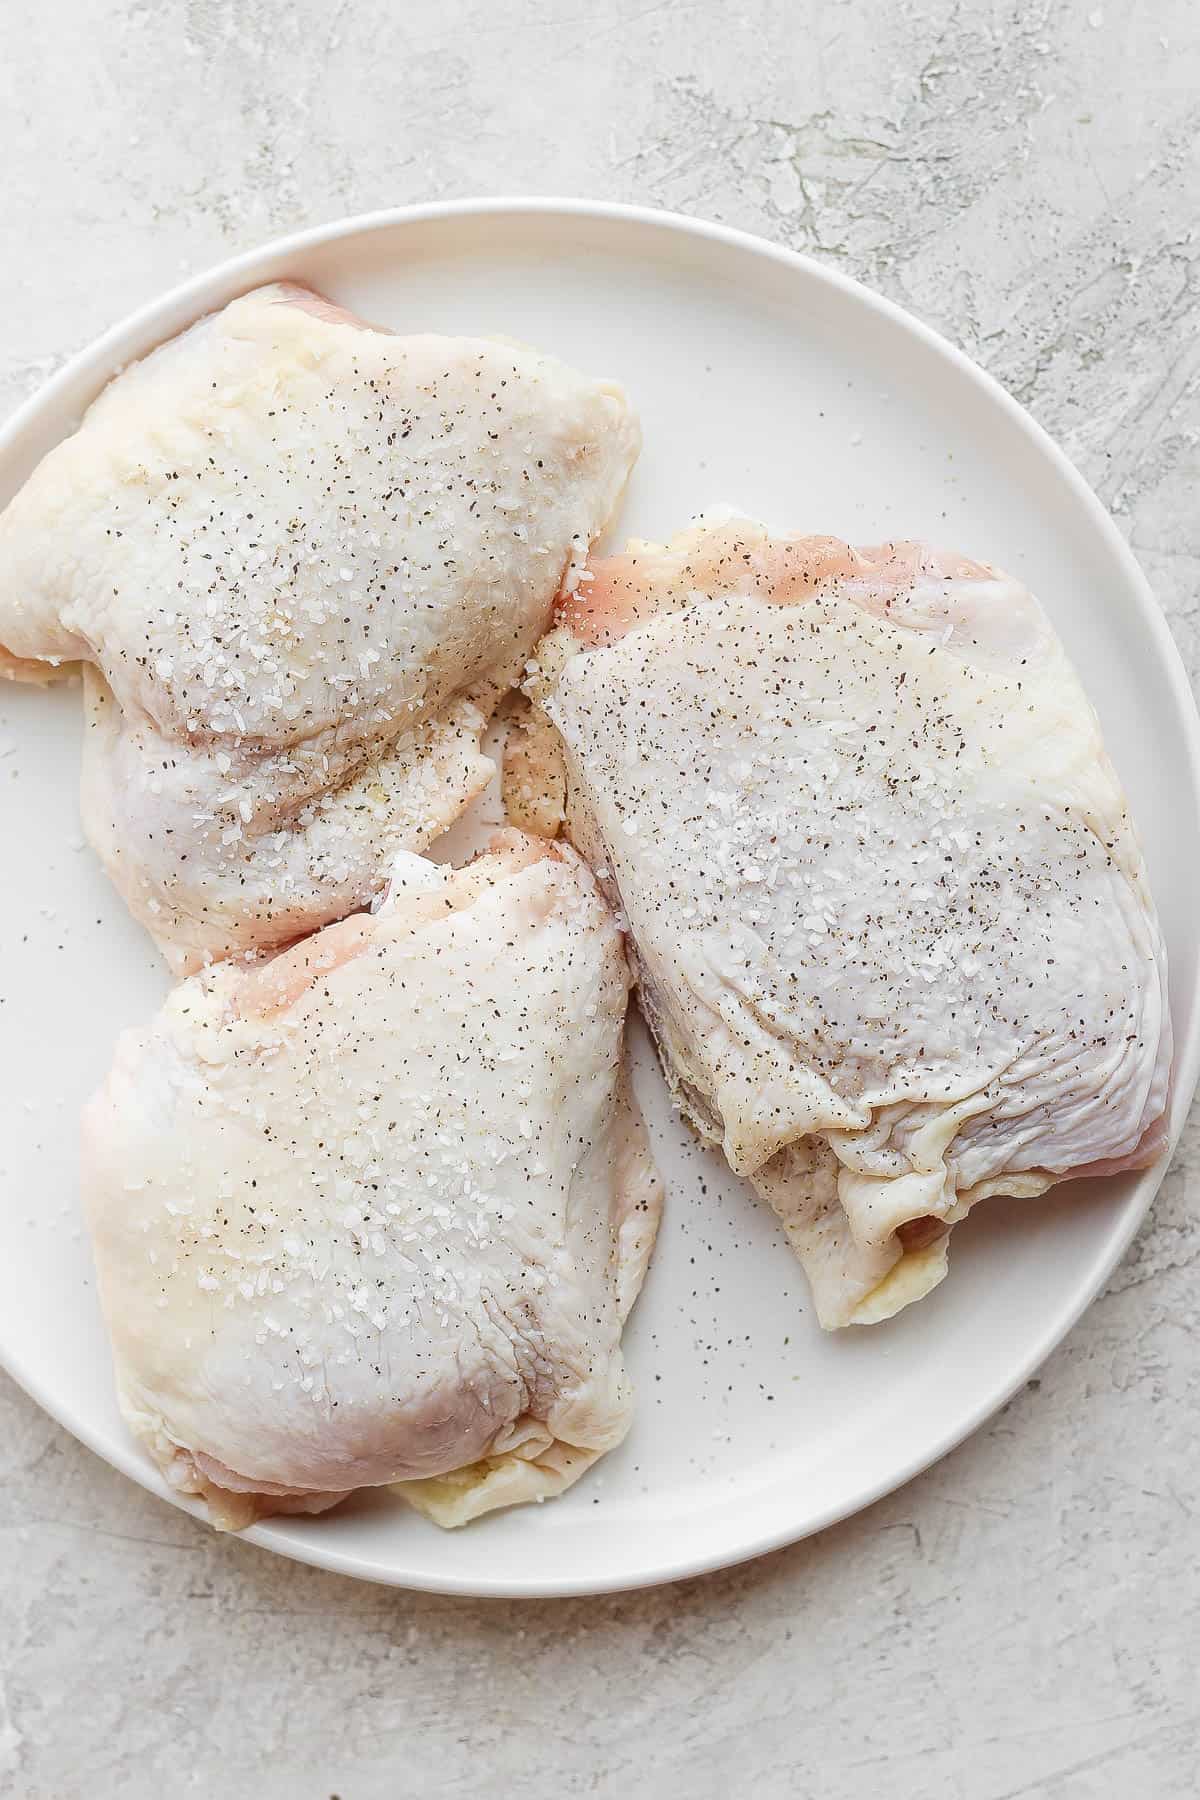 Raw chicken thighs seasoned and on a plate.